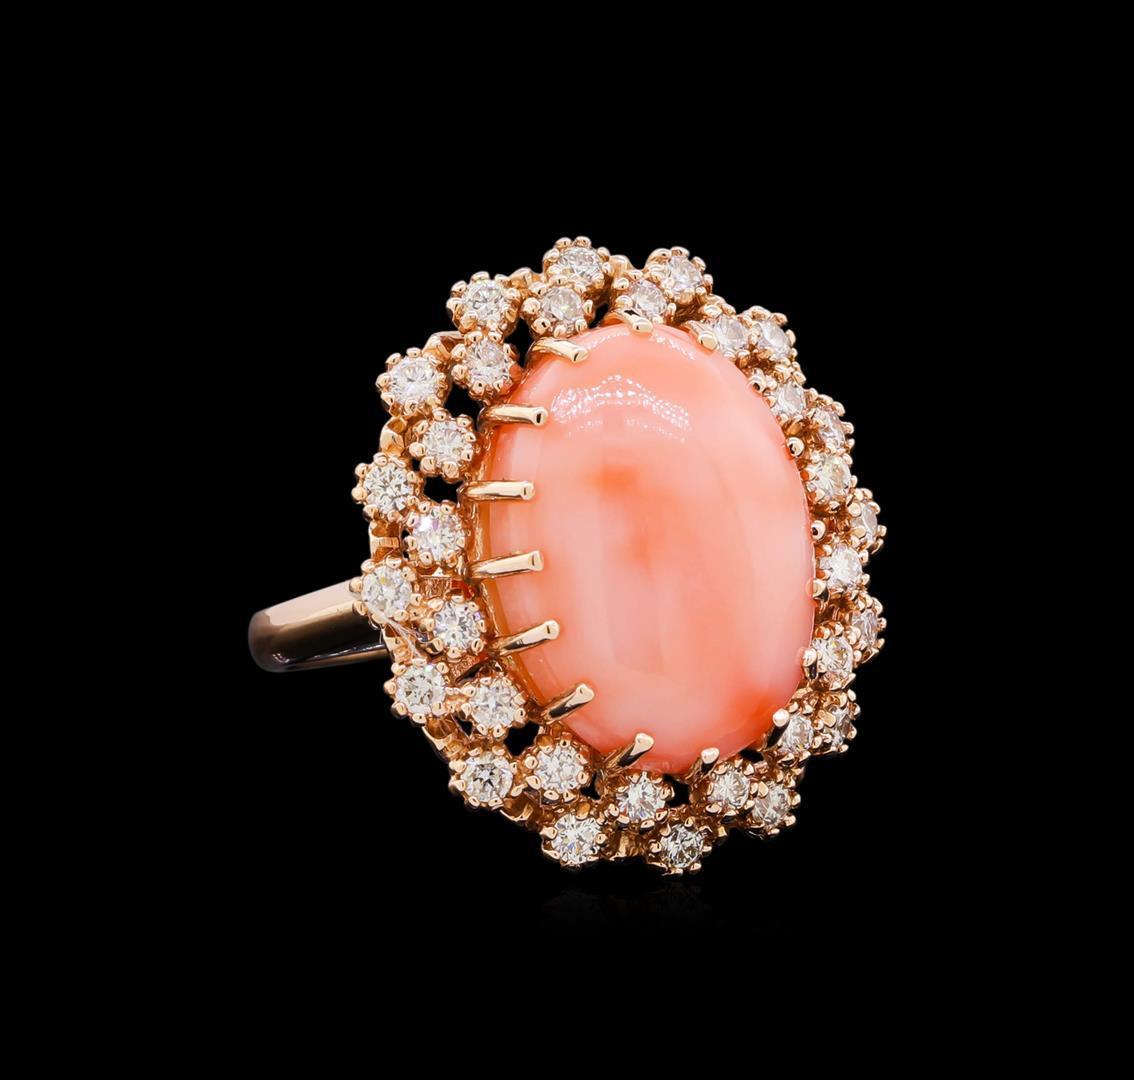 9.60 ctw Pink Coral and Diamond Ring - 14KT Rose Gold